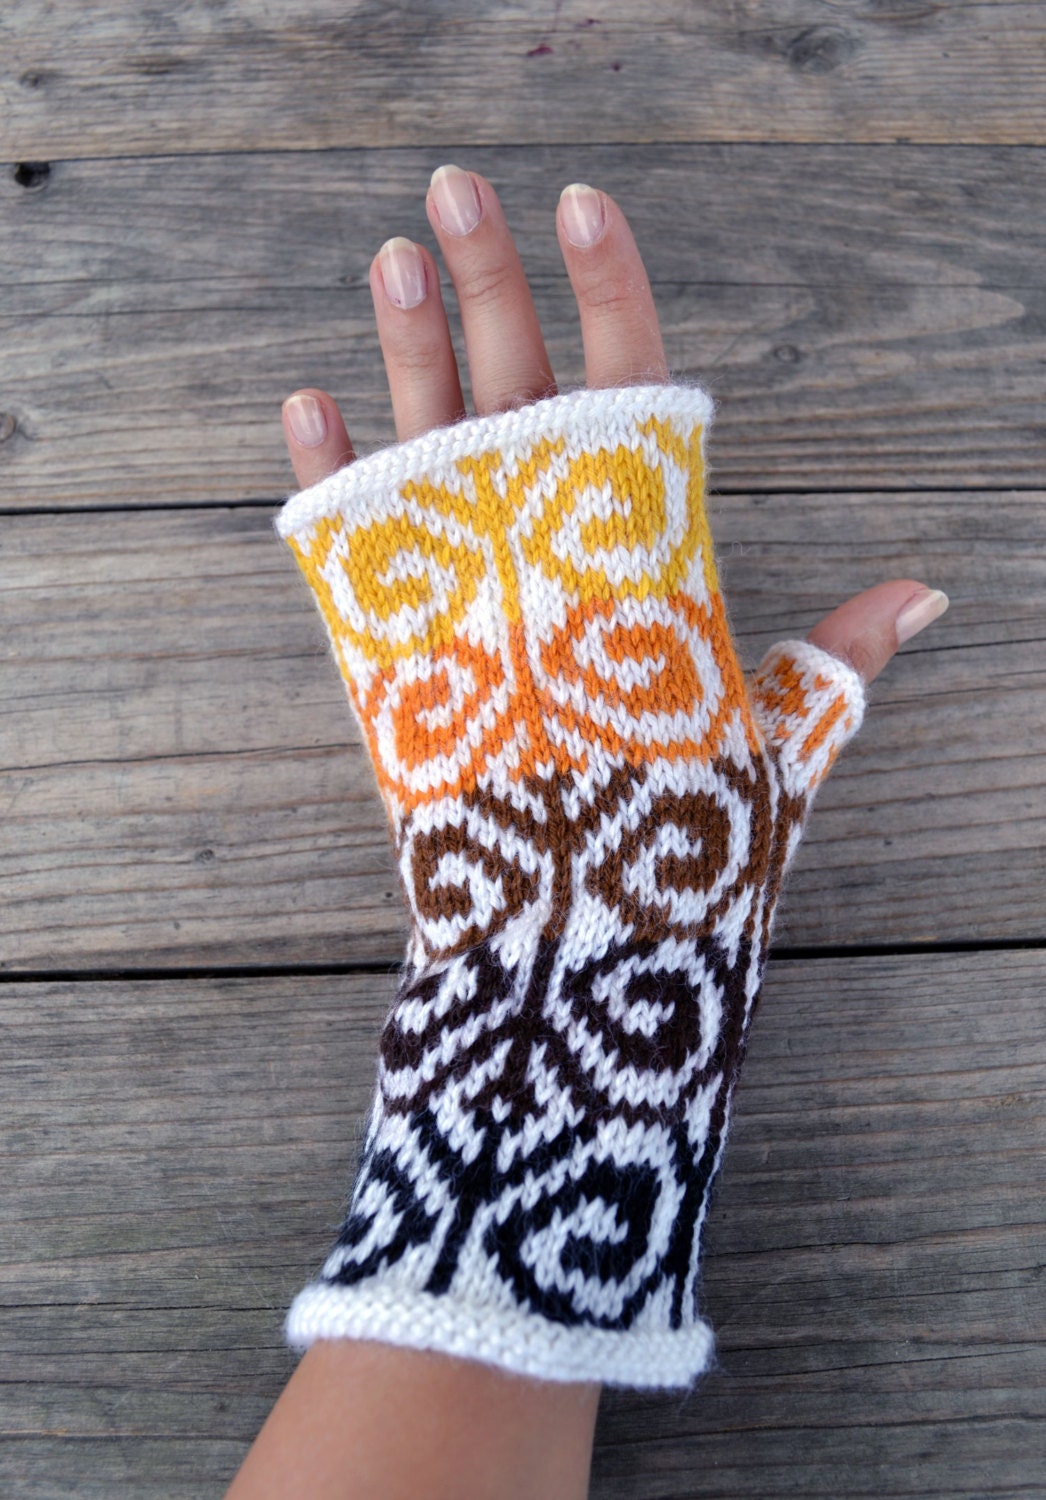 Wool Arm Warmers - Hand-knit Fingerless Gloves- Yellow and Brown Fingerless Mittens - Fall Winter Accesories nO 68.